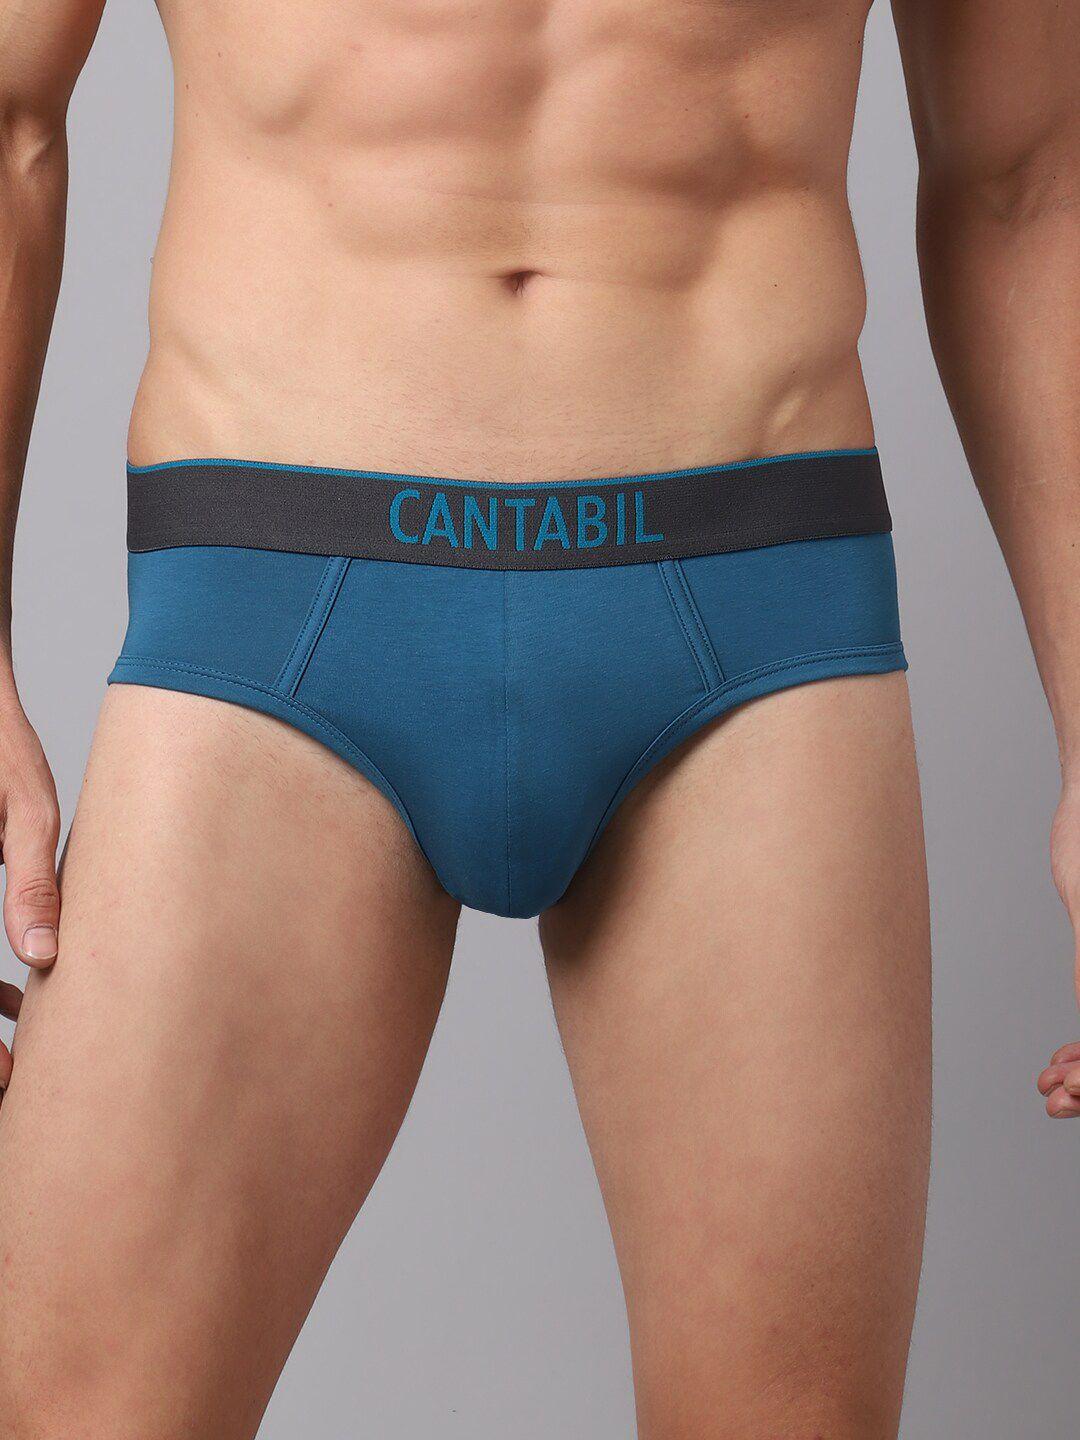 cantabil-men-pack-of-2-teal-solid-briefs-mbrf00016_teal